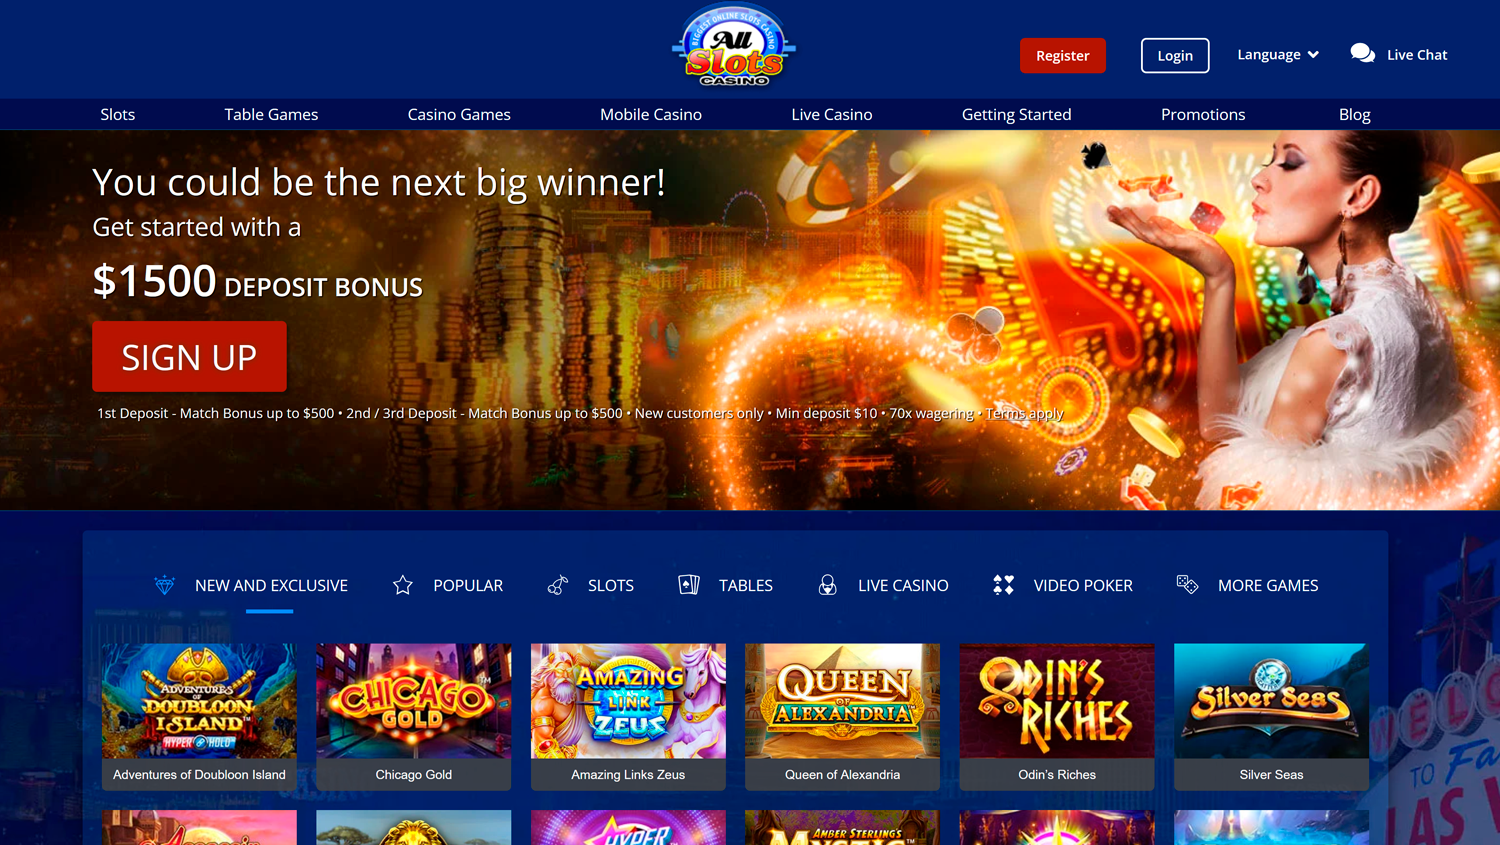 Main page on All Slots Casino site